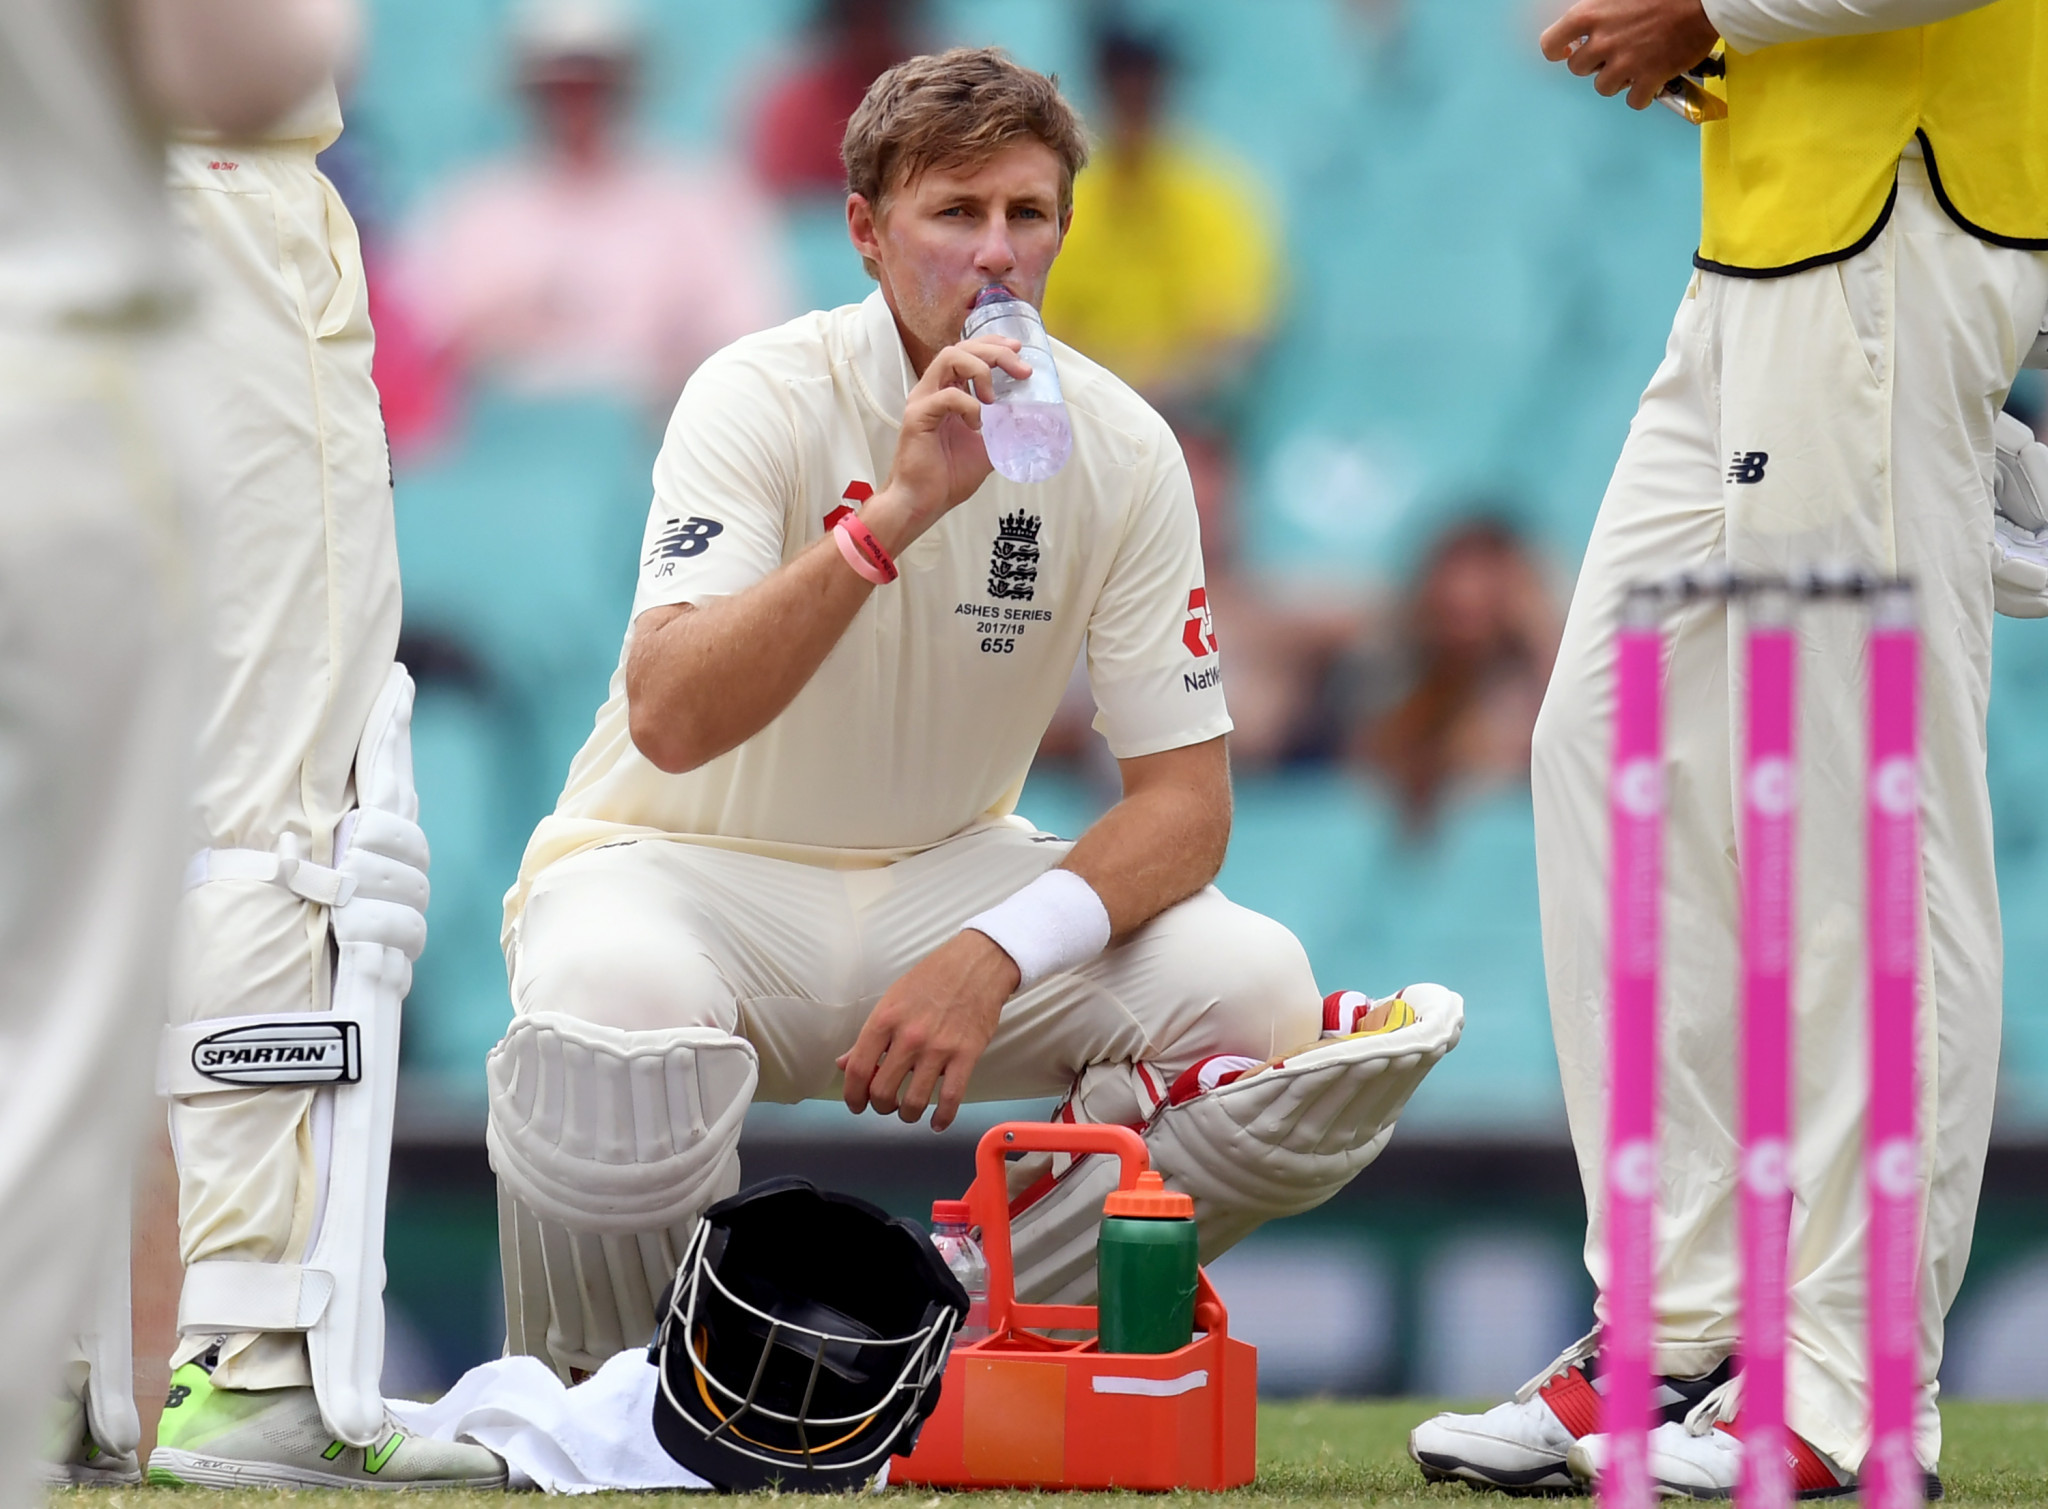 England cricket captain required hospital treatment for severe dehydration following the fifth Ashes Test in Sydney ©Getty Images